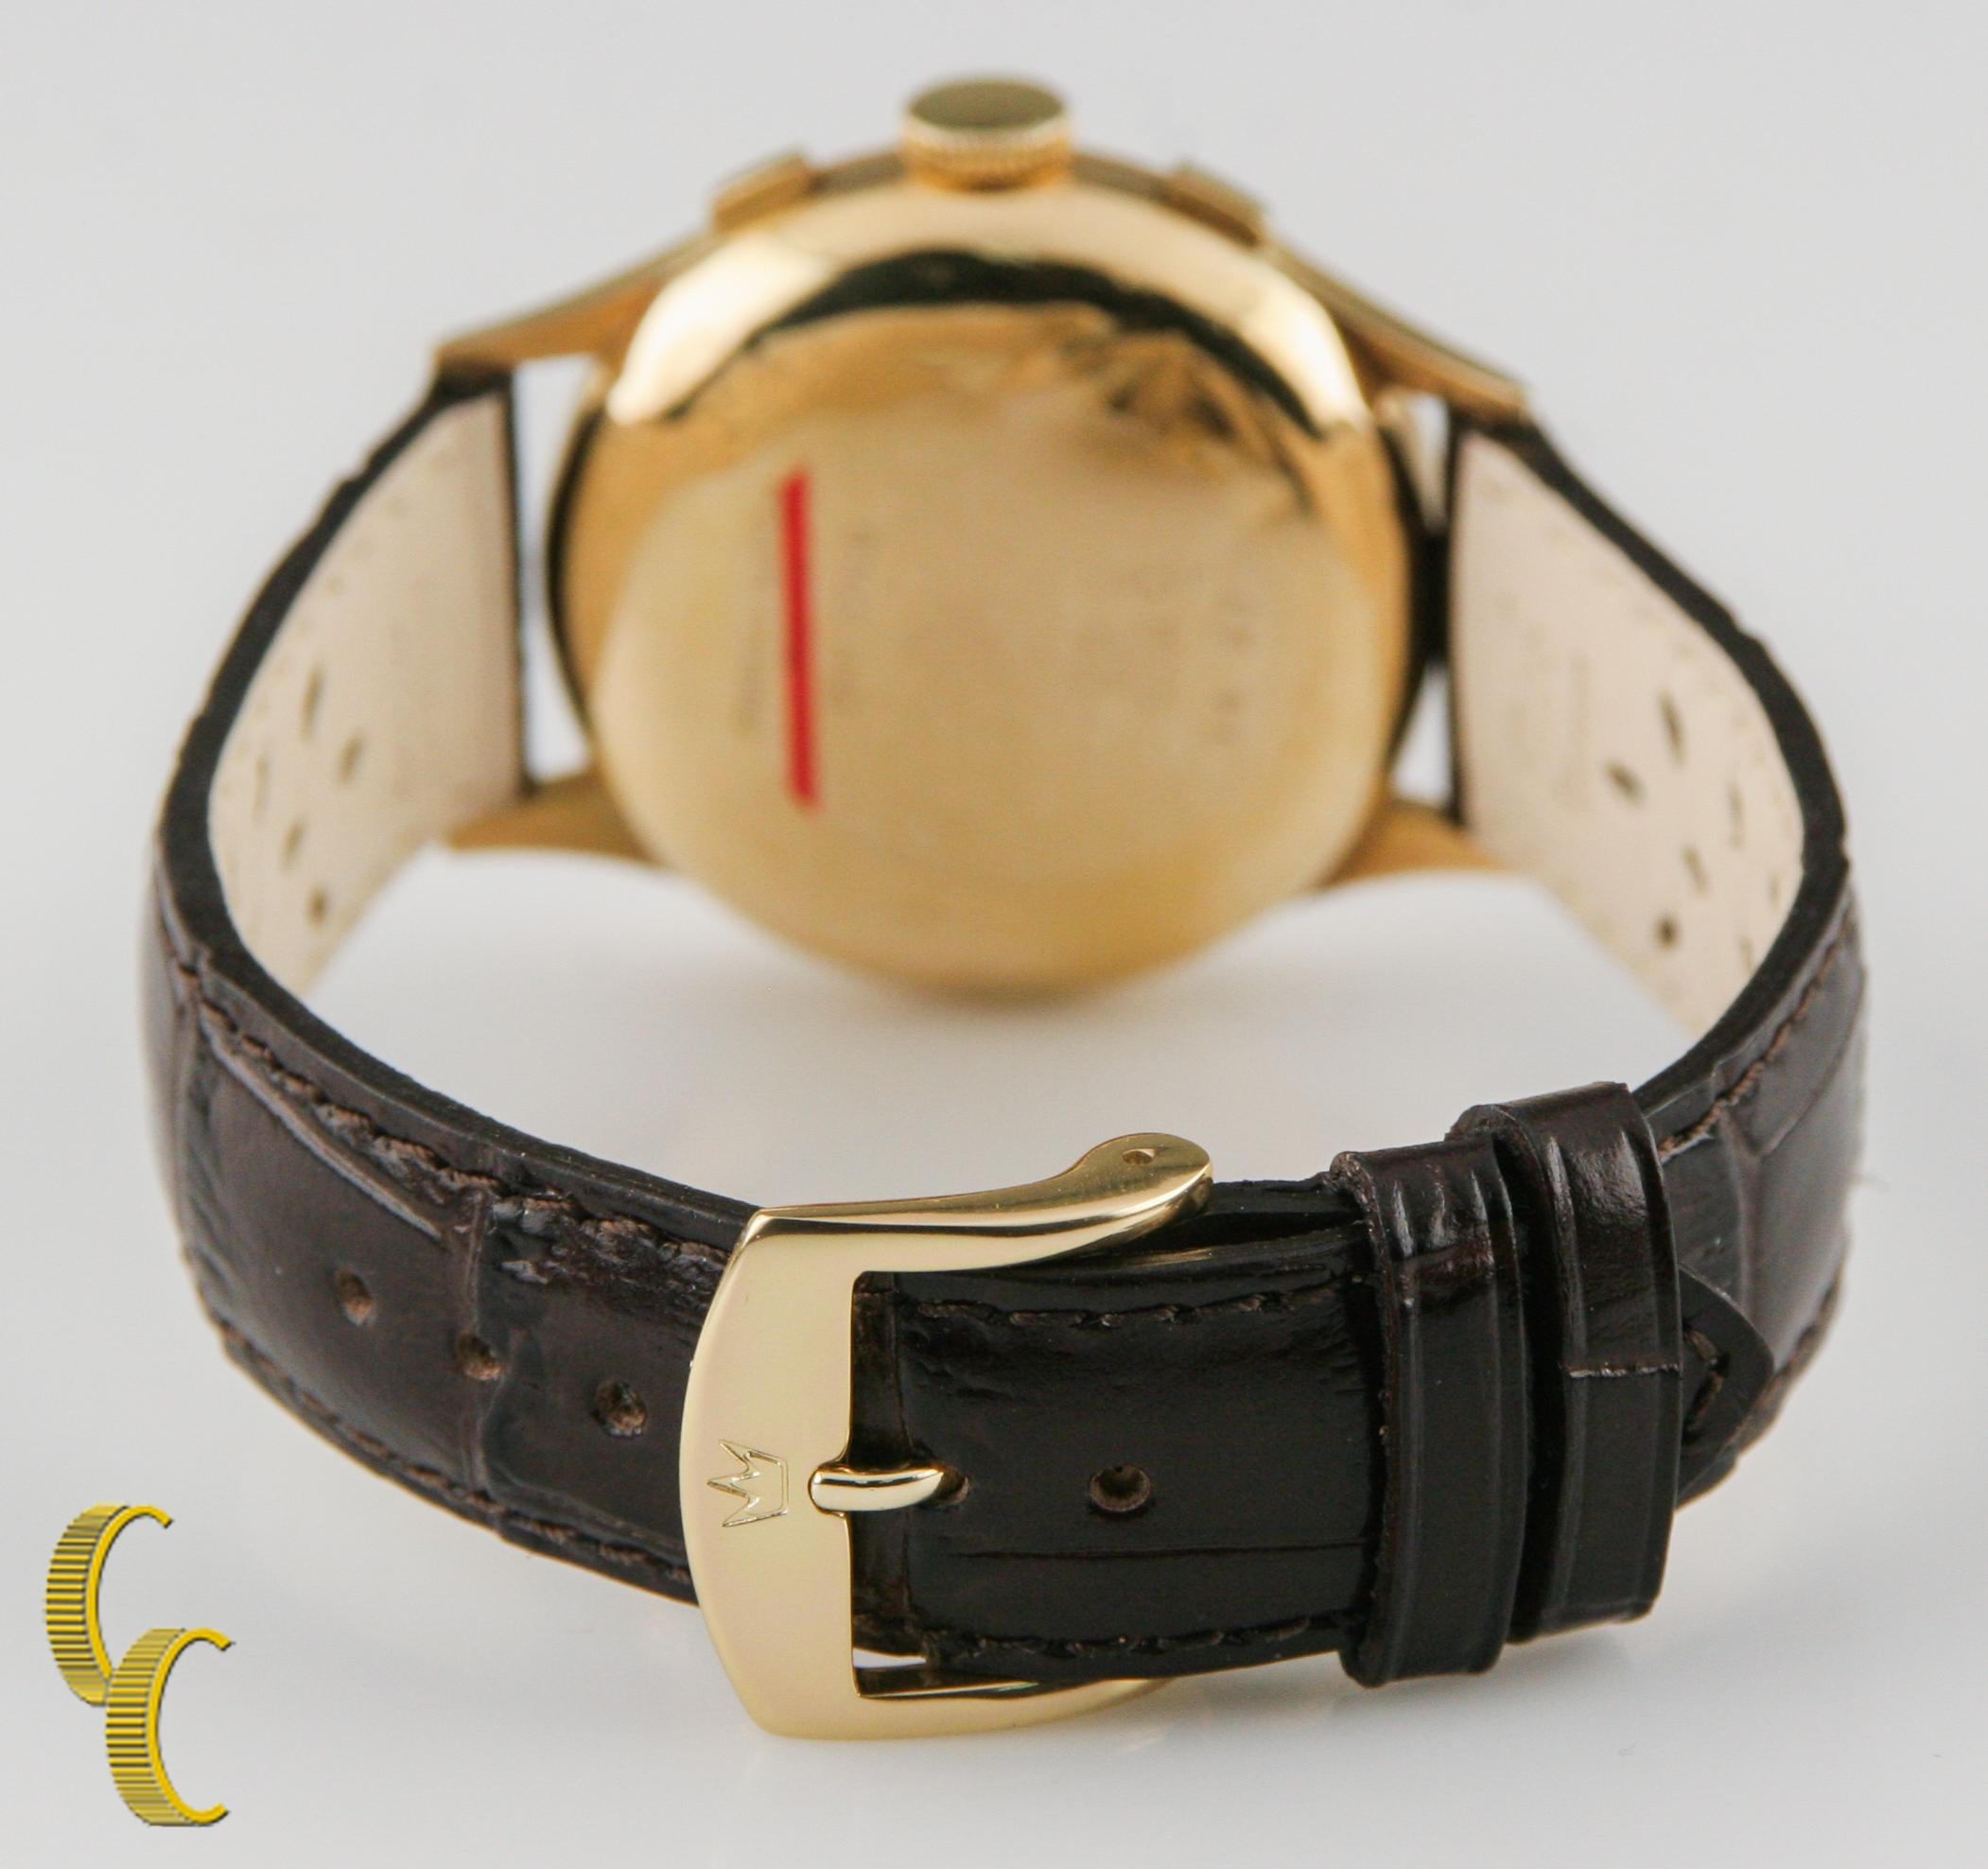 square gold watch men's leather band